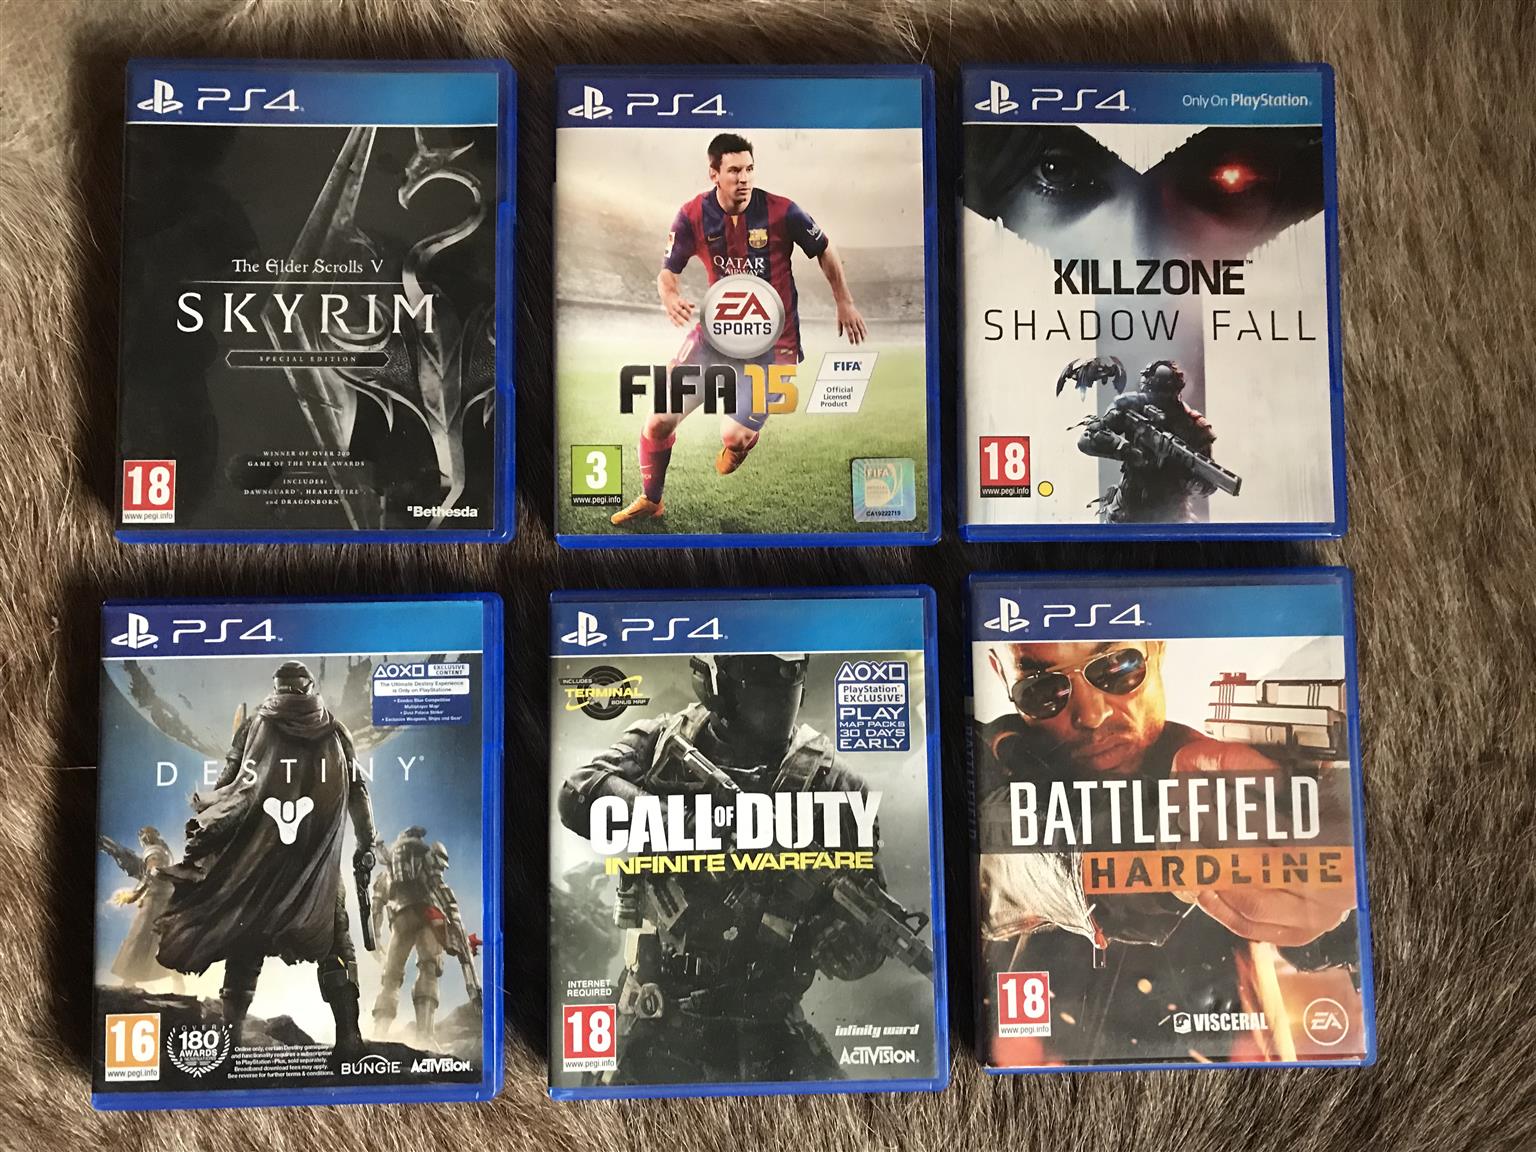 places that sell ps4 games near me